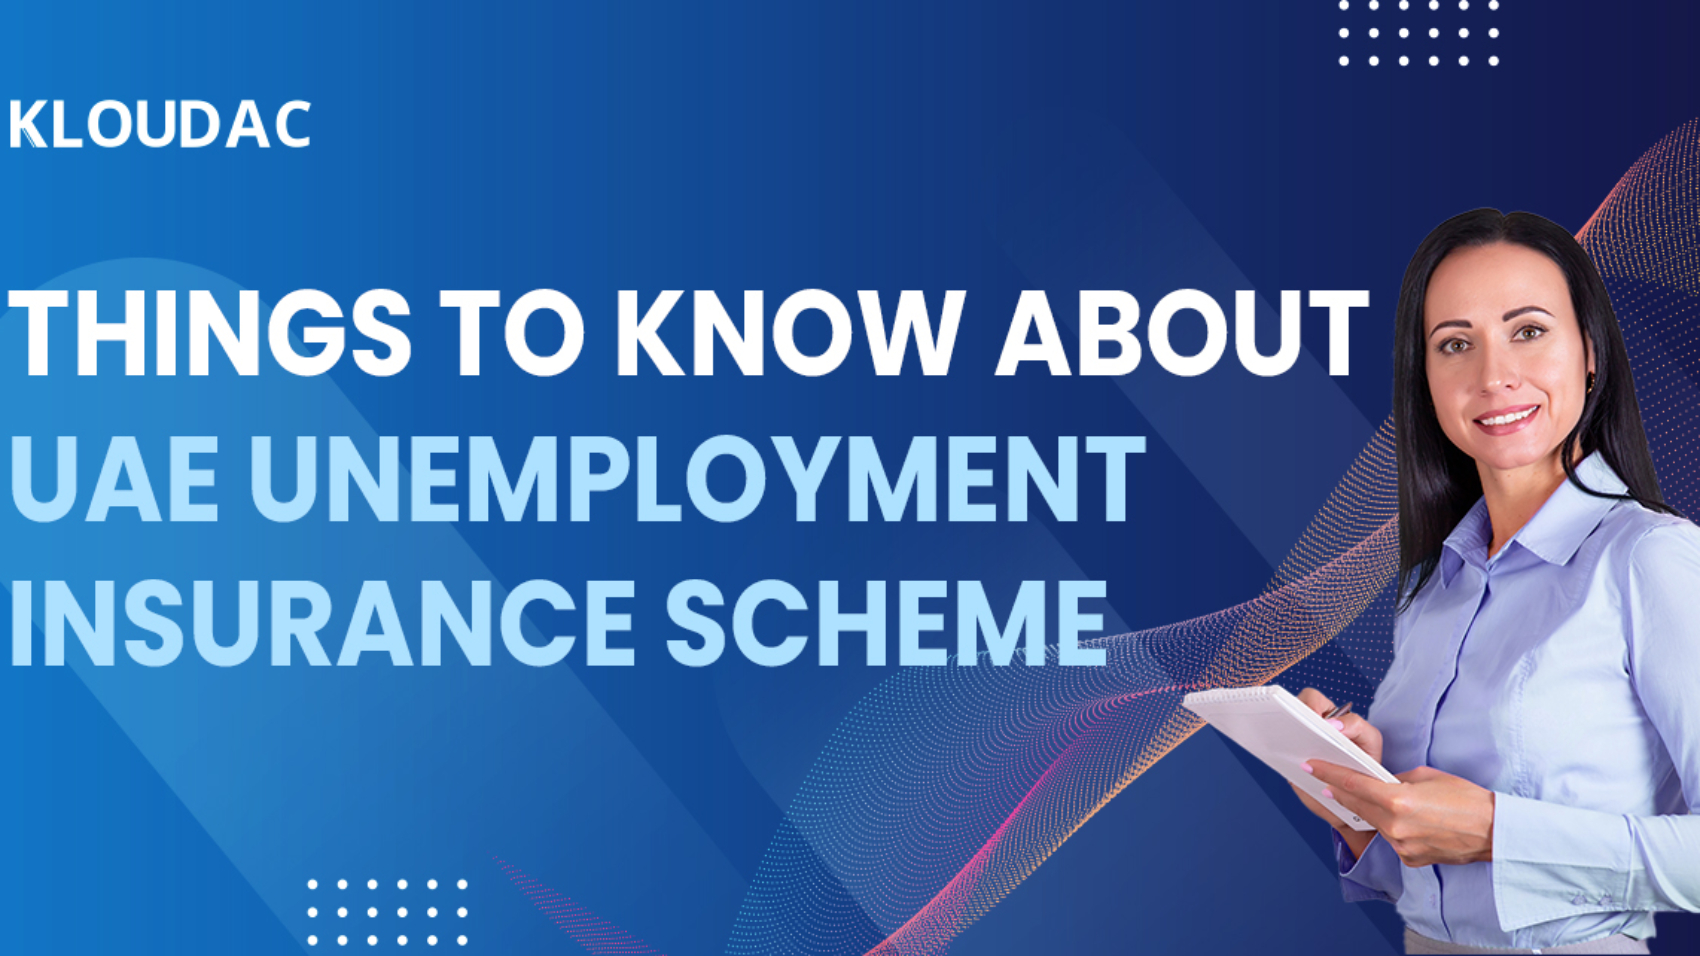 Things to know about UAE unemployment insurance scheme